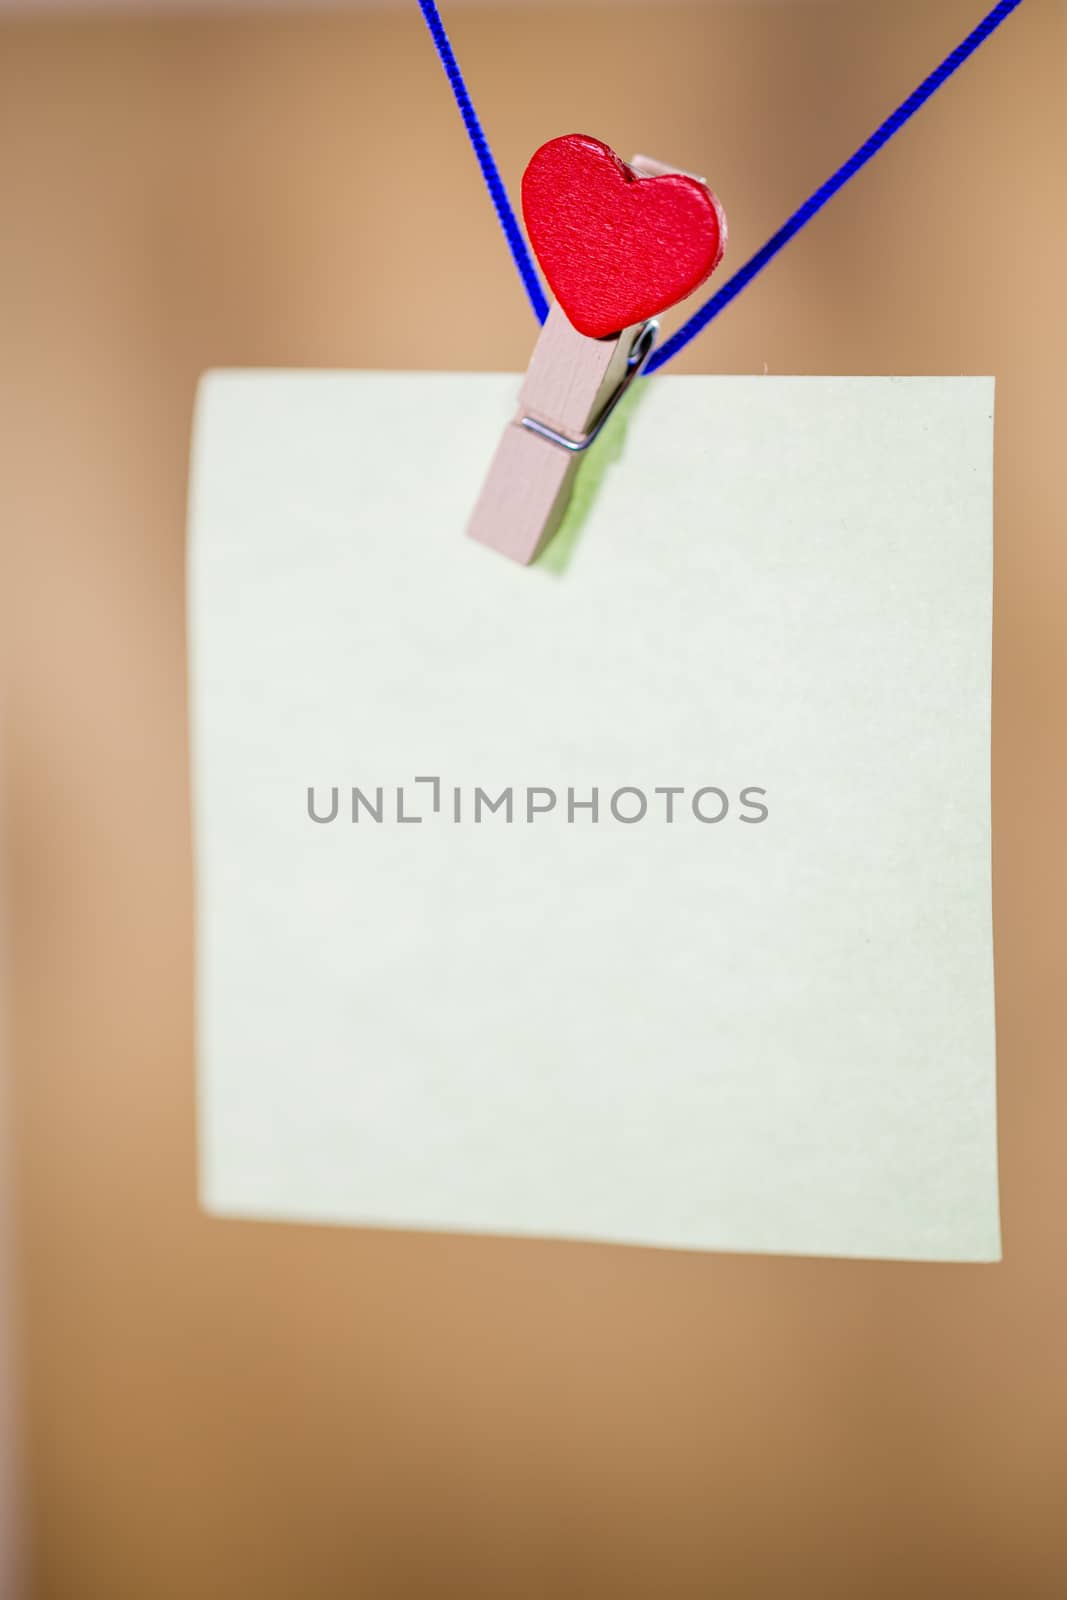 Heart clothes peg holding note with blank copy space